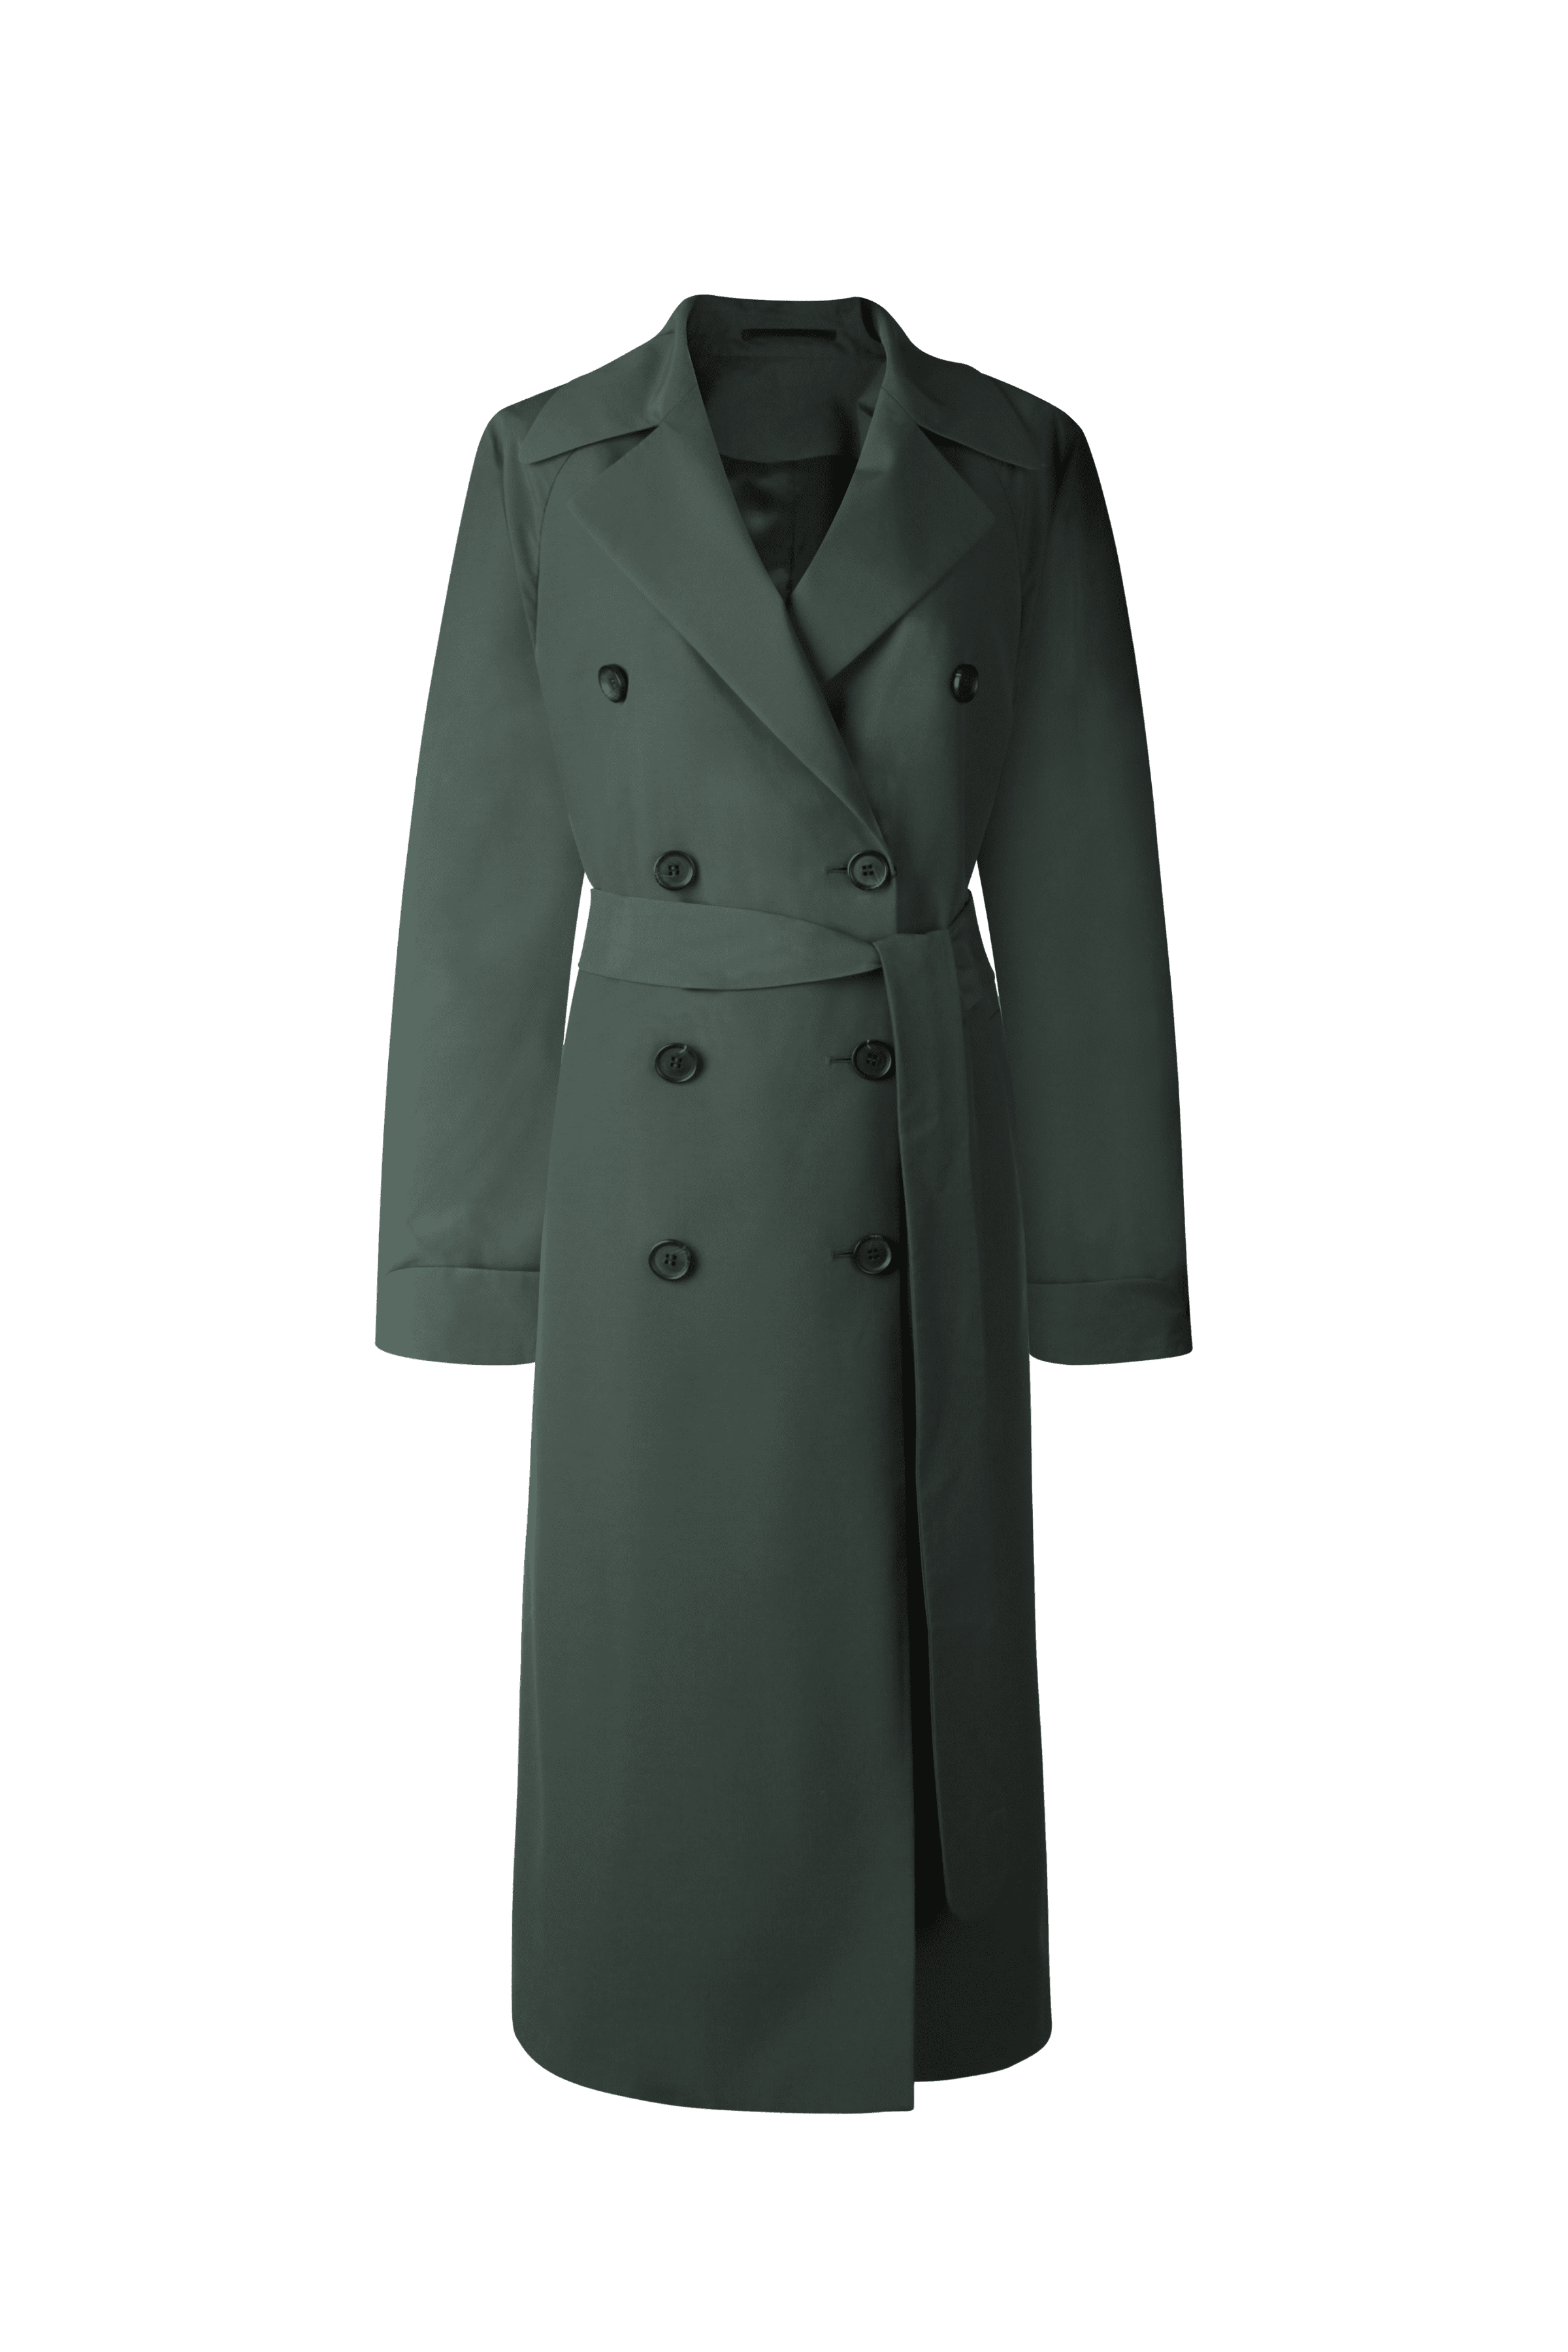 Womens Ladies Lapel Double Breasted Long Jacket Wind Trench Forest Raincoat  Coat